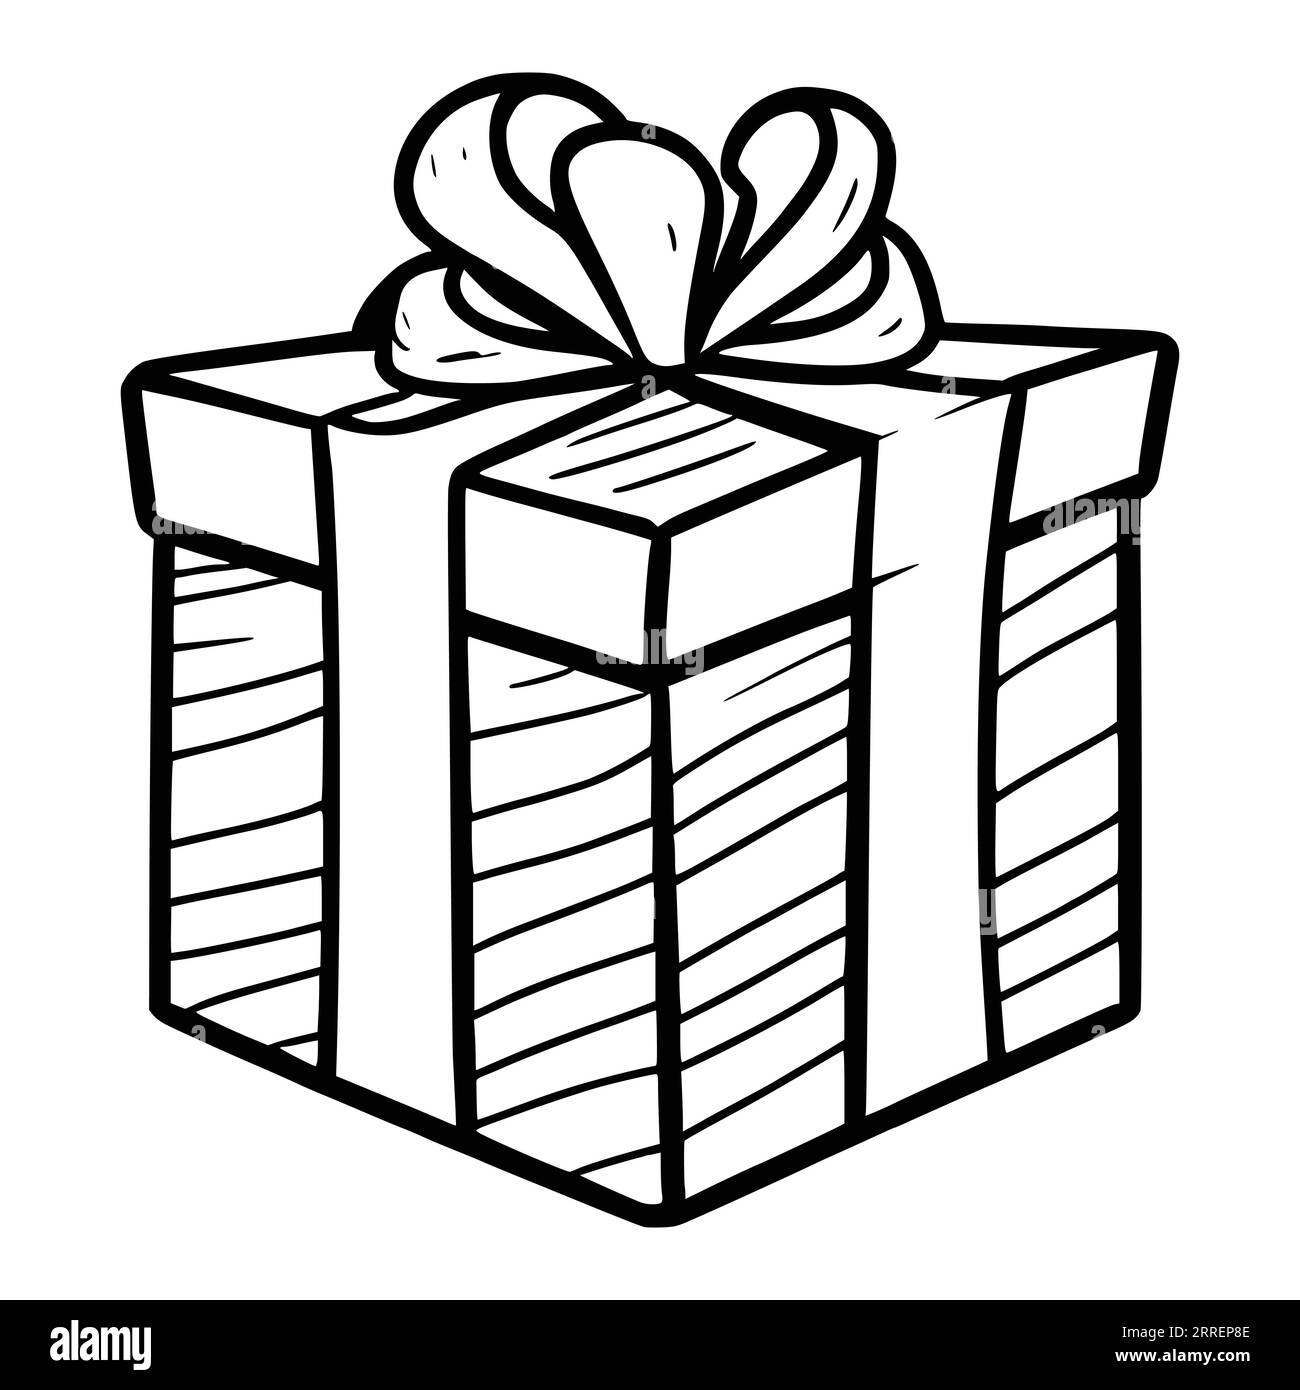 Gift Box Coloring Pages For Kids Stock Vector